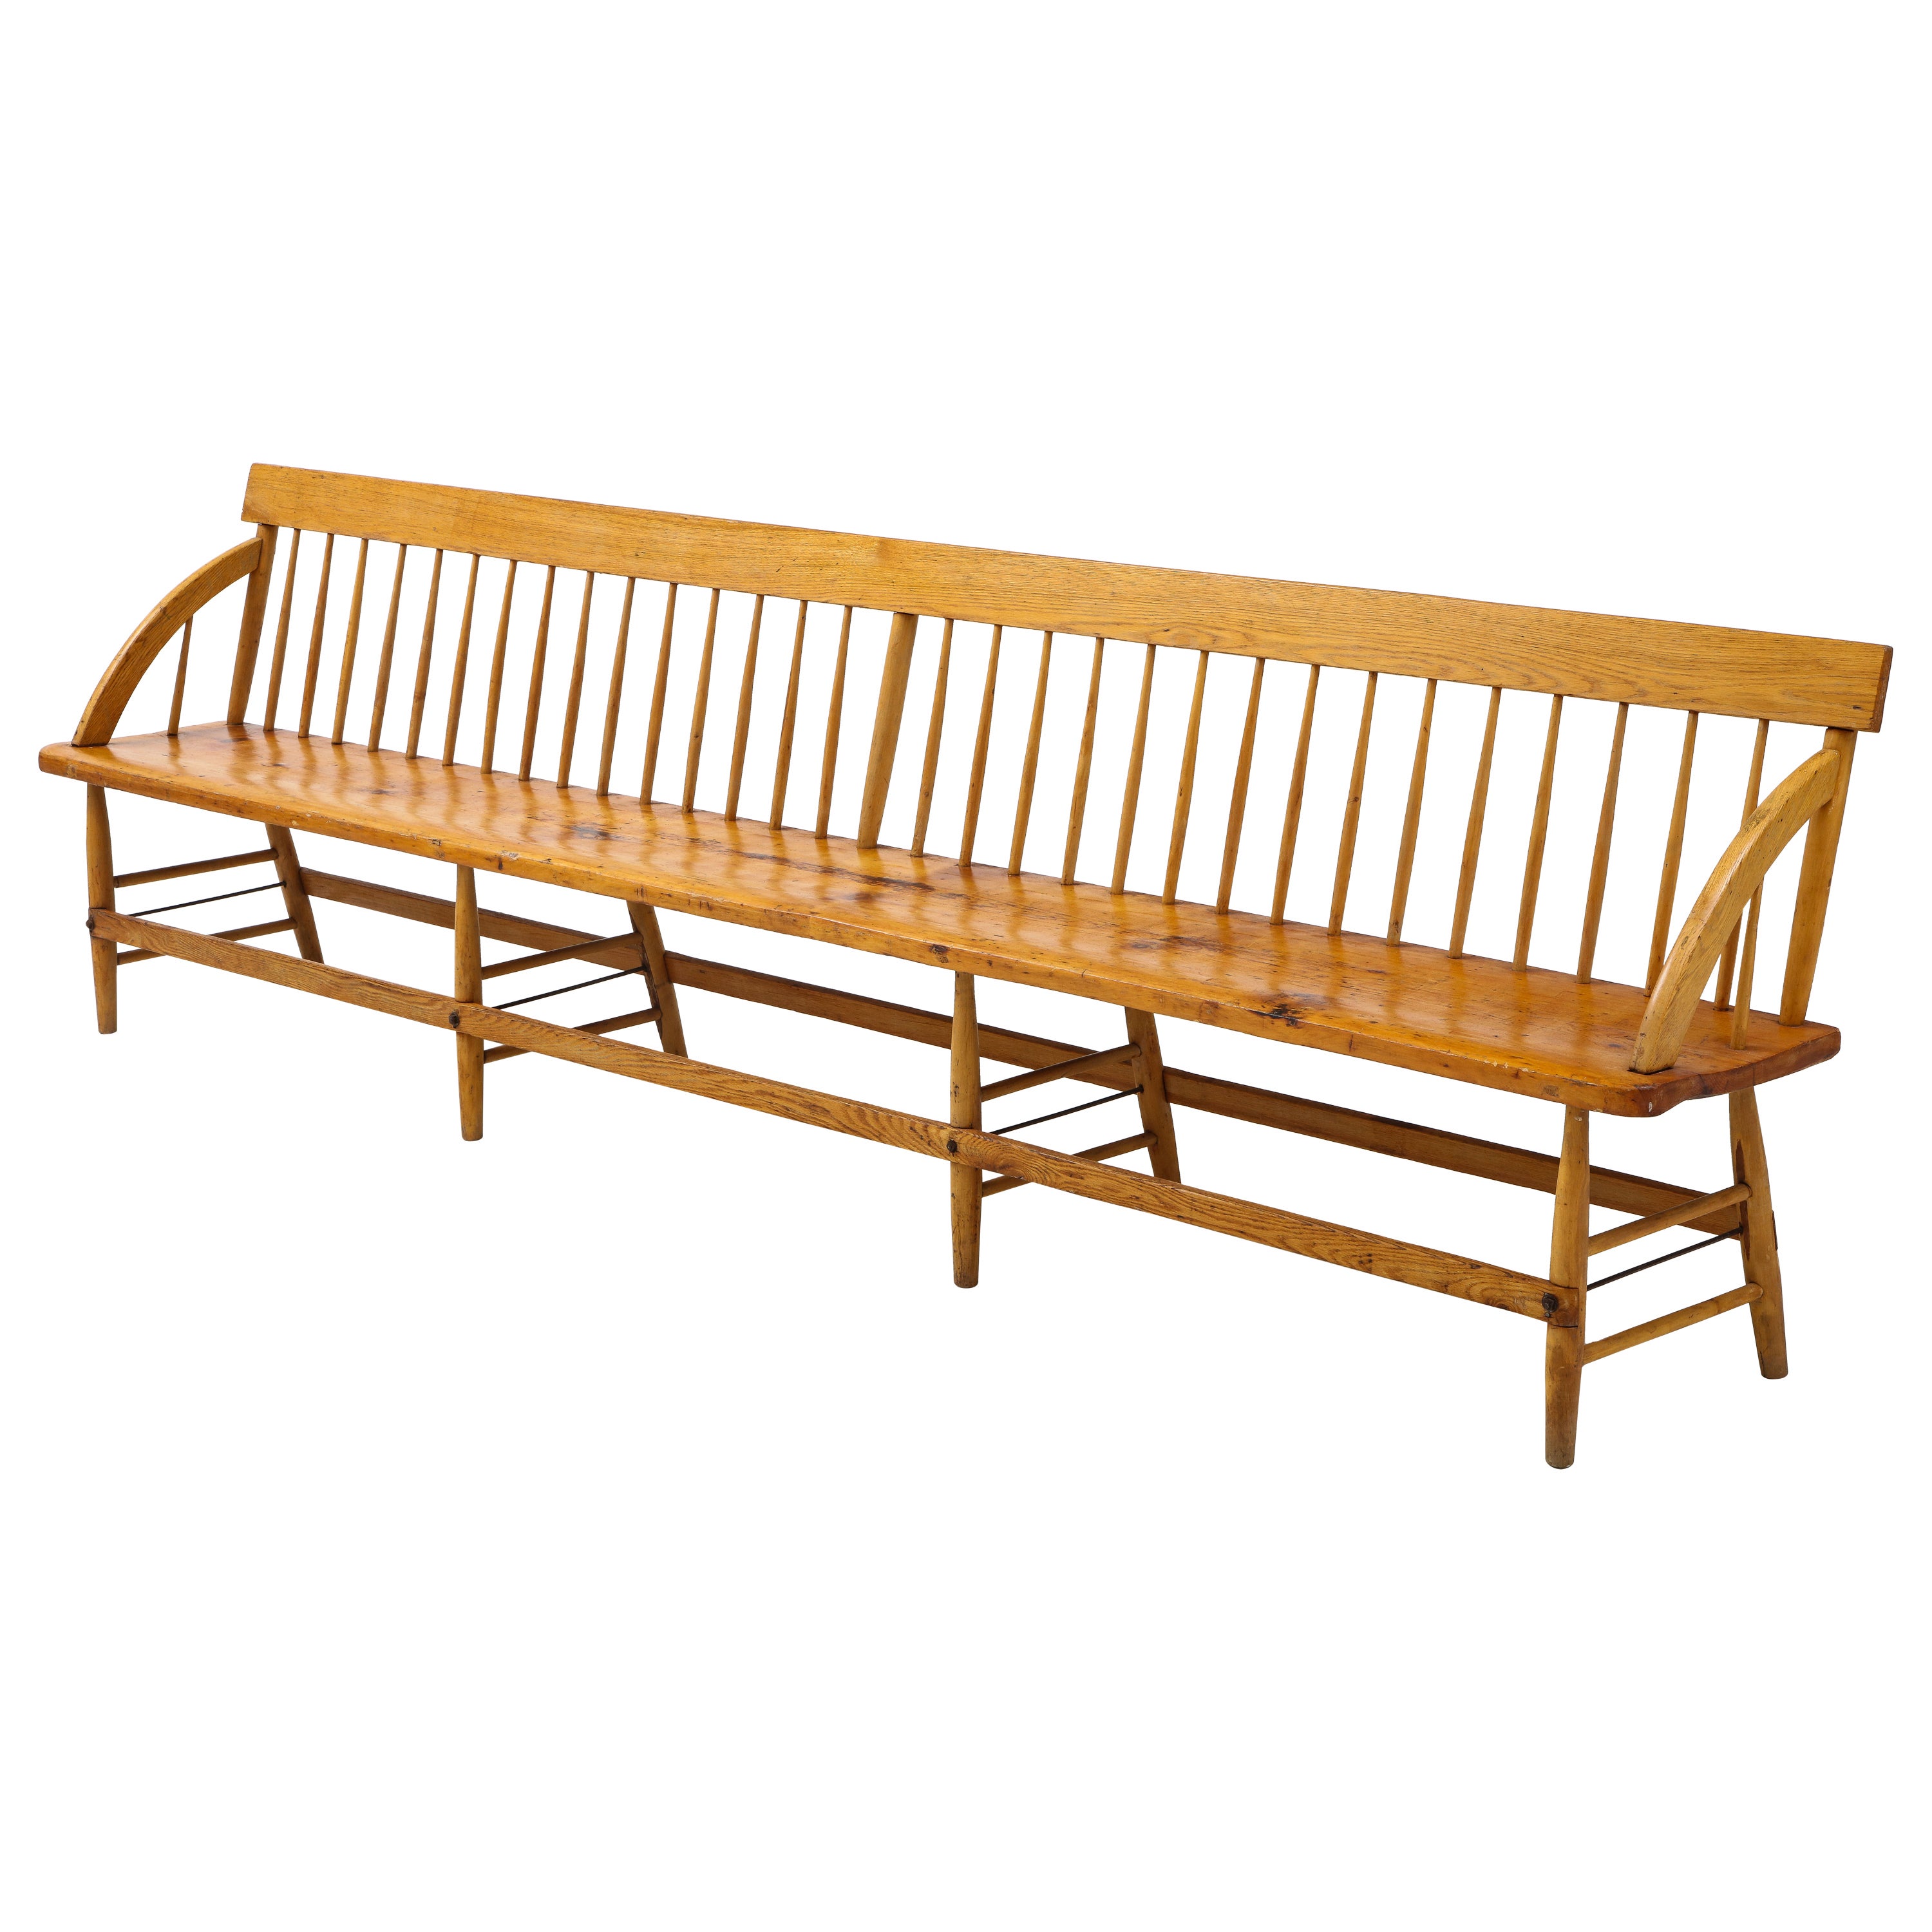 Exceptional 19th C. Hand Made Quaker Meeting House Bench, New England/Cape Cod